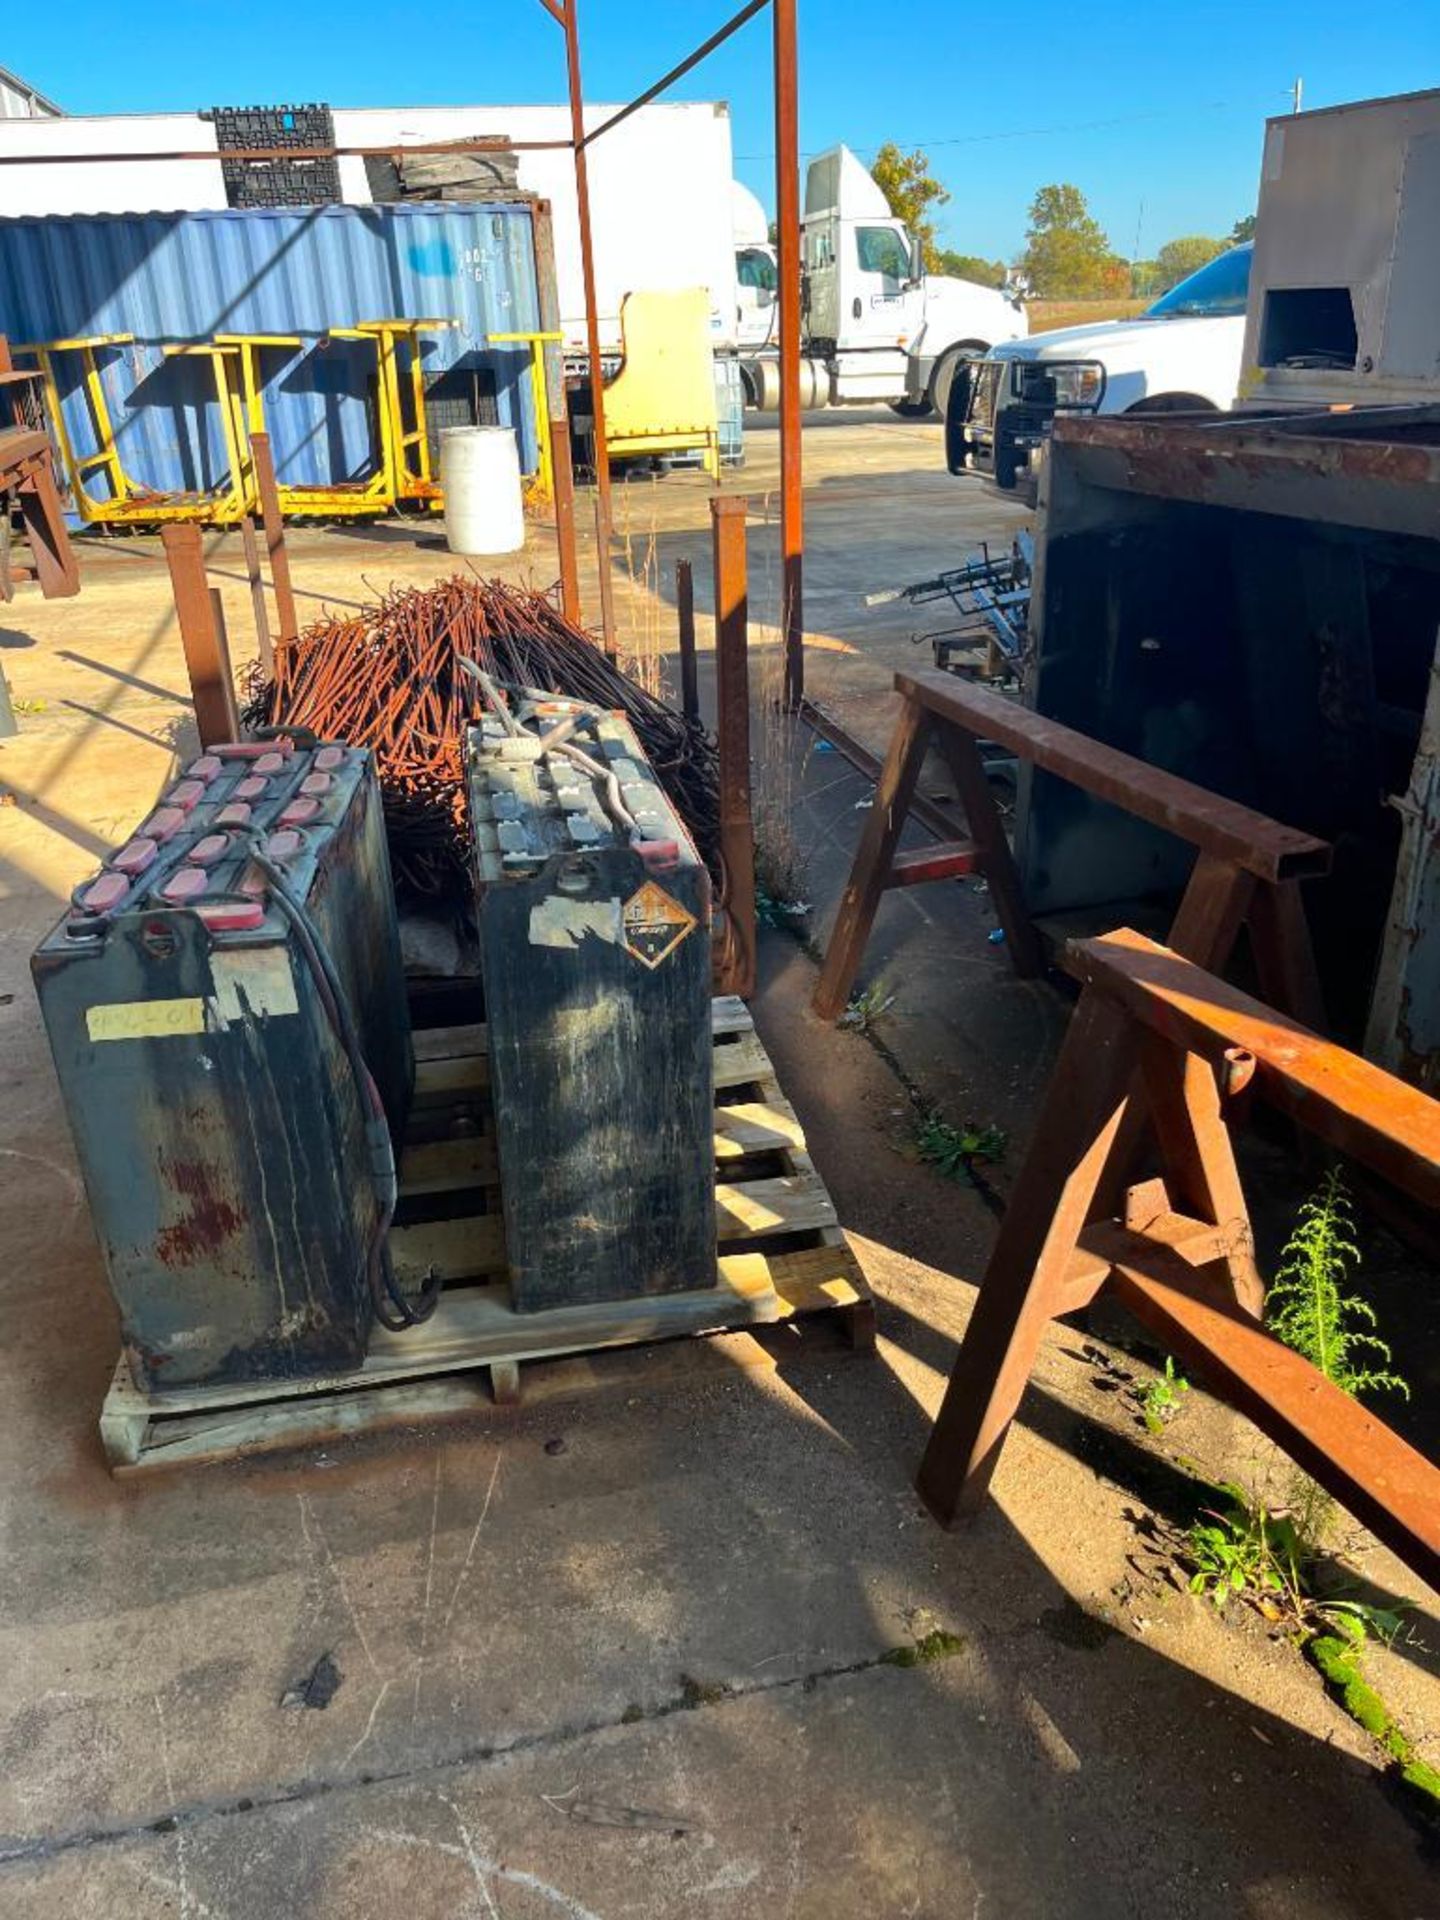 Lot of Scrap Around Lot 170 & 171 Including AC Units, Forklift Batteries, Rack of Steel (See Picture - Image 4 of 5